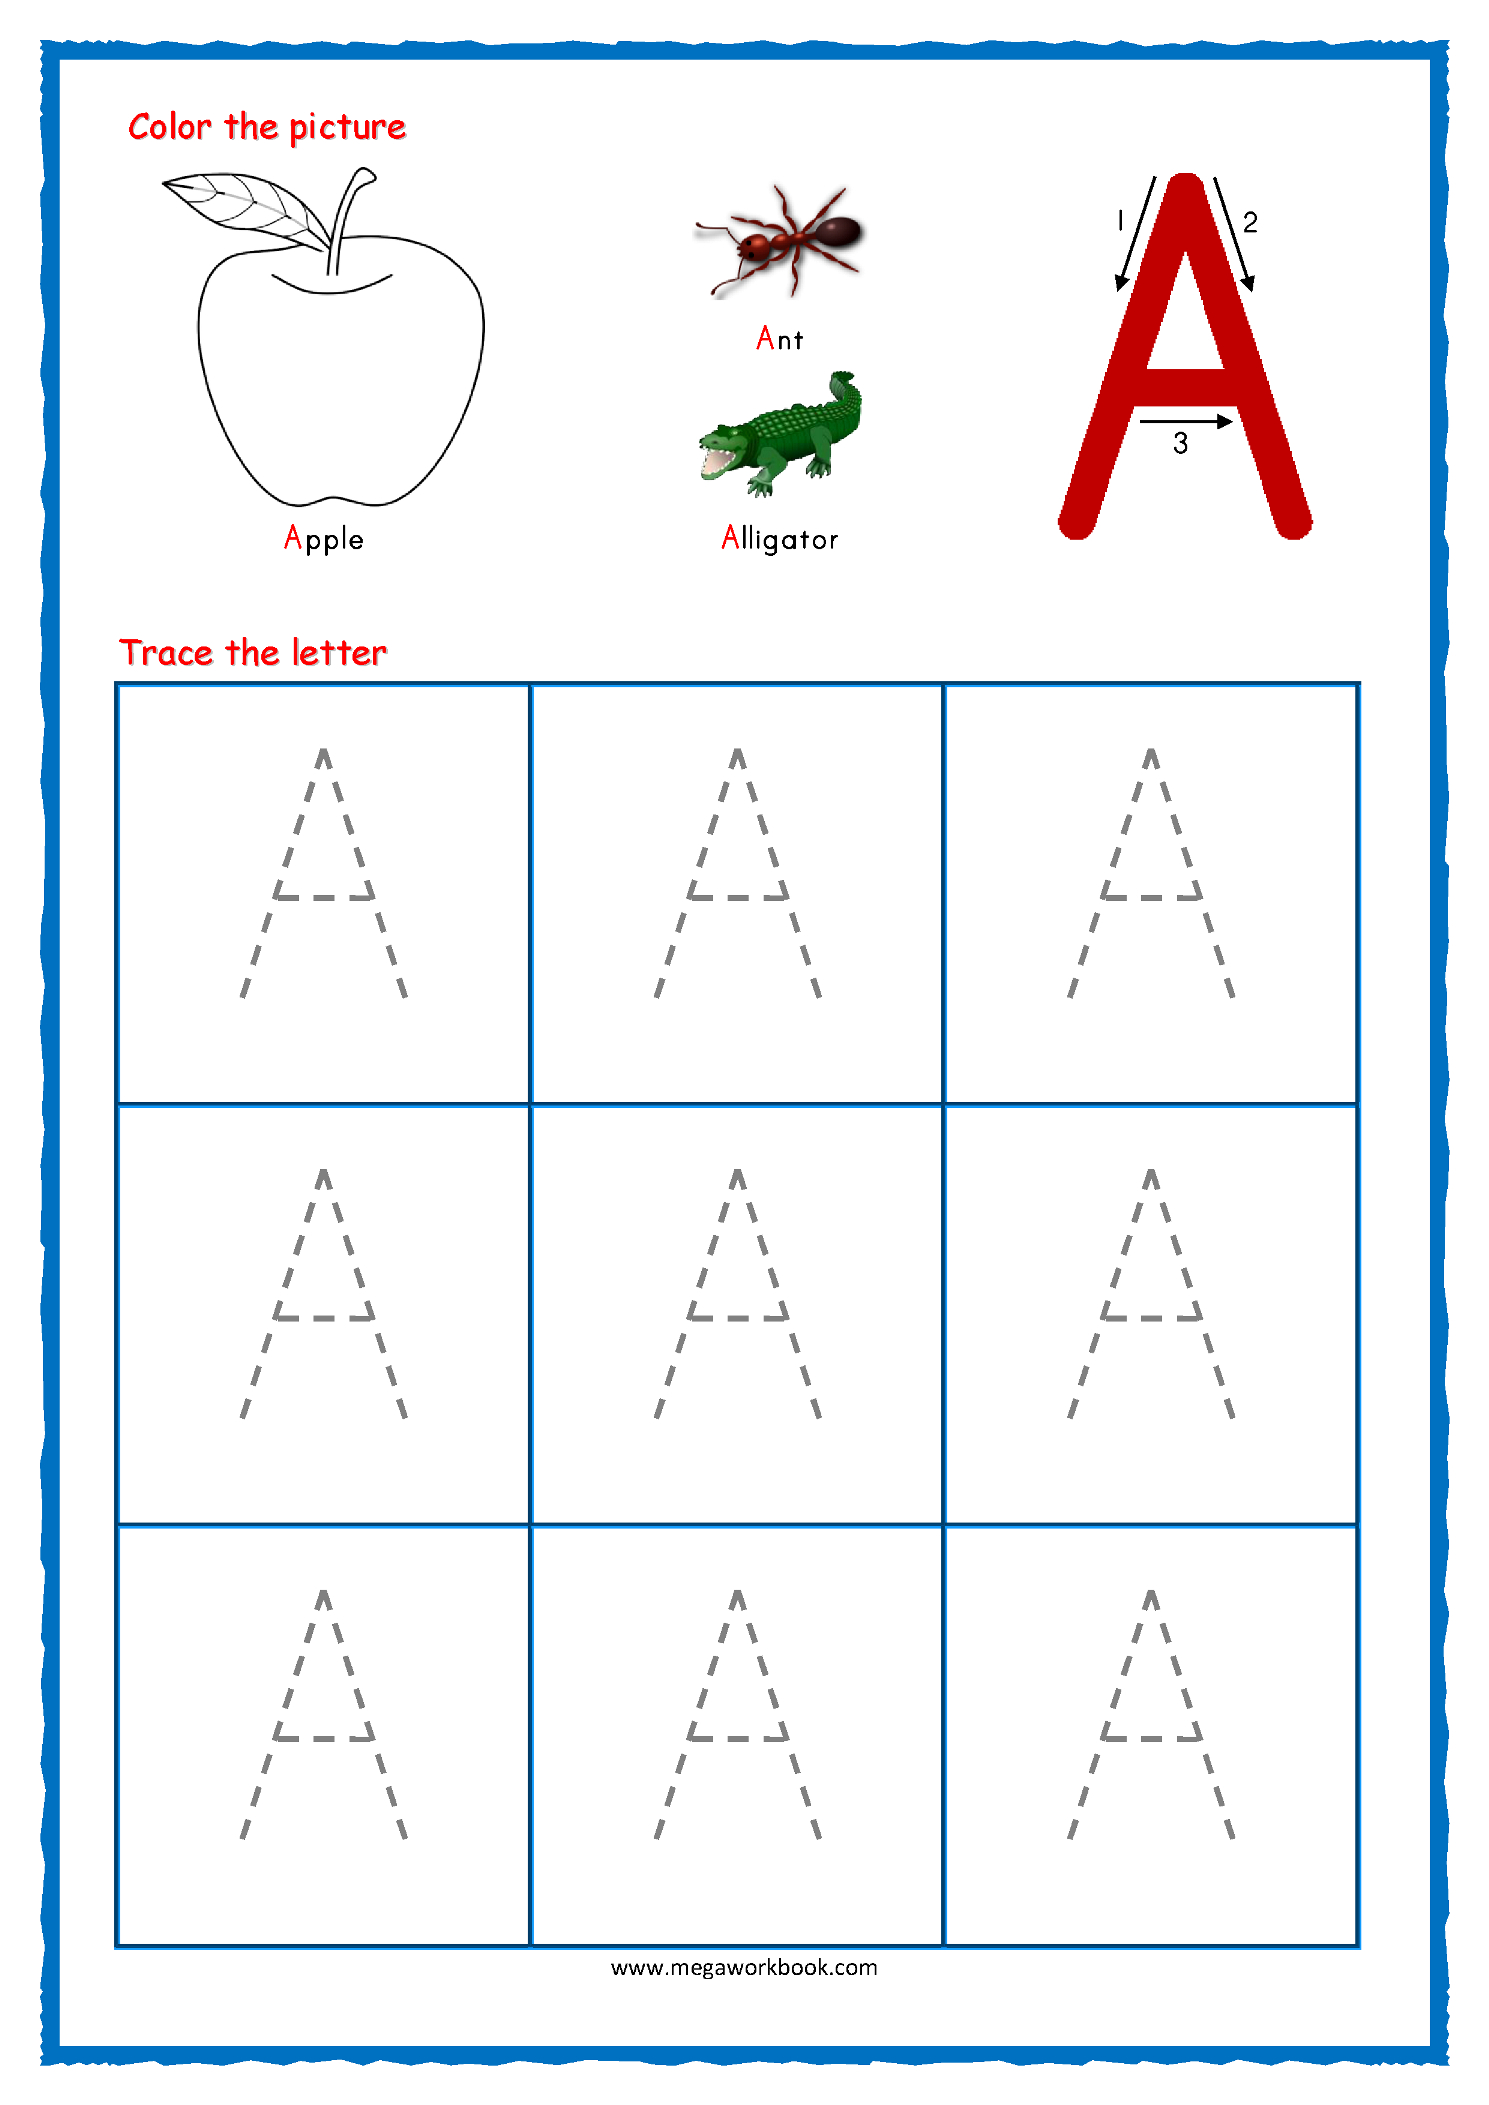 Coloring Book : Printable Letter Tracing Sheets For with Alphabet Writing Worksheets Pdf